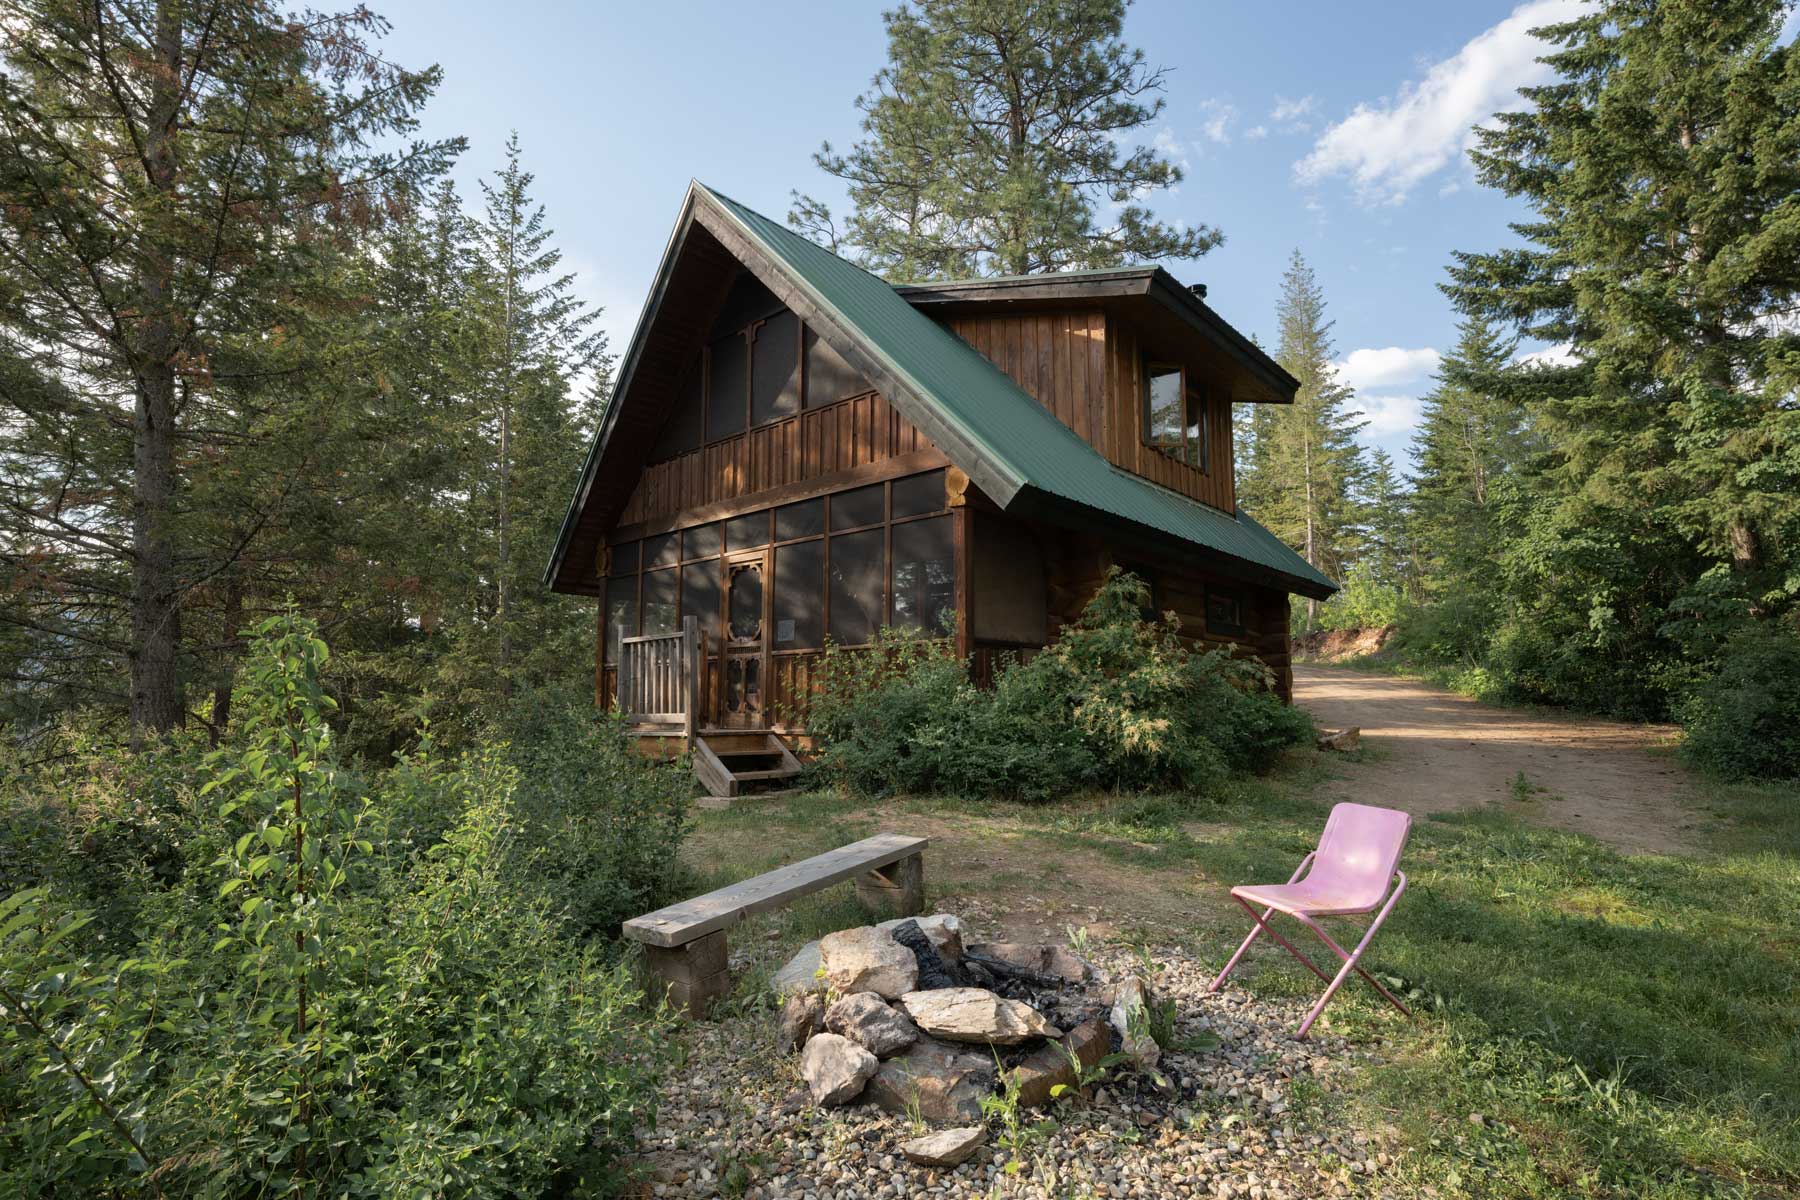 Wild Rose Cabin in the Larch Hills, BC.